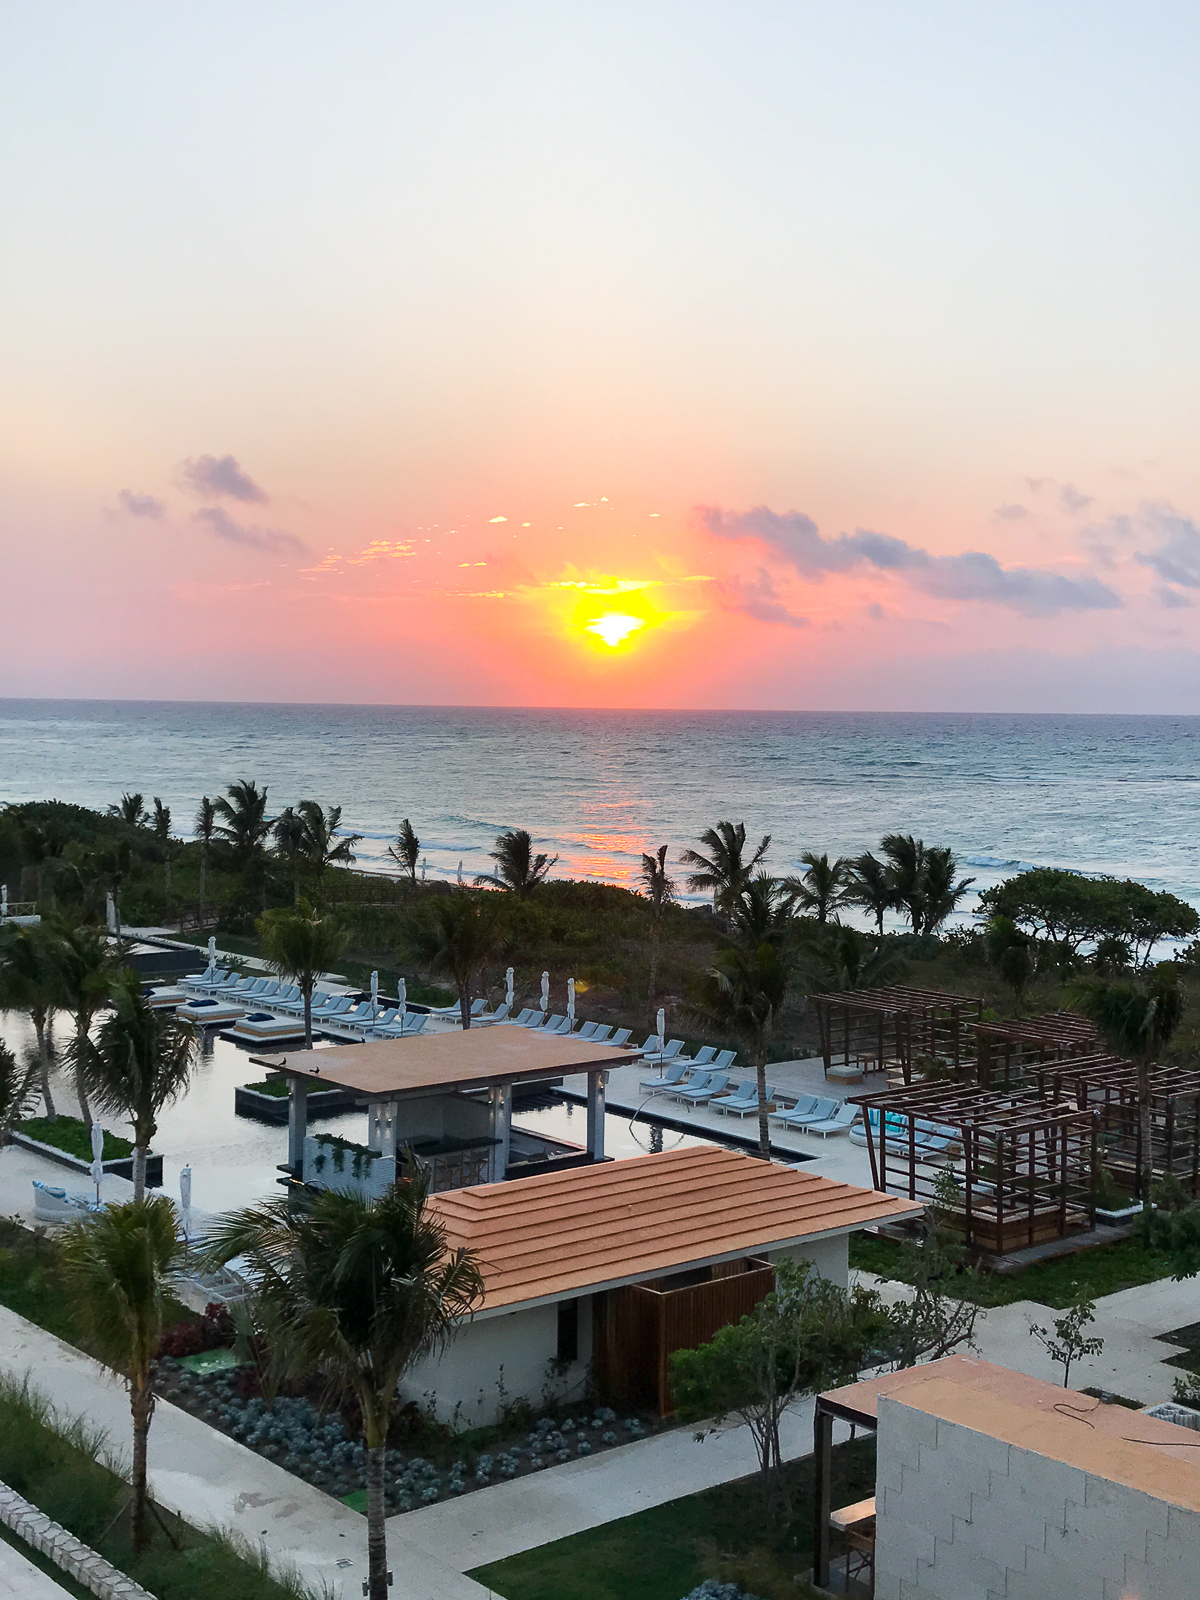 UNICO 20 87 Hotel Riviera Maya Review featured by popular South Carolina blogger, The Southern Style Guide